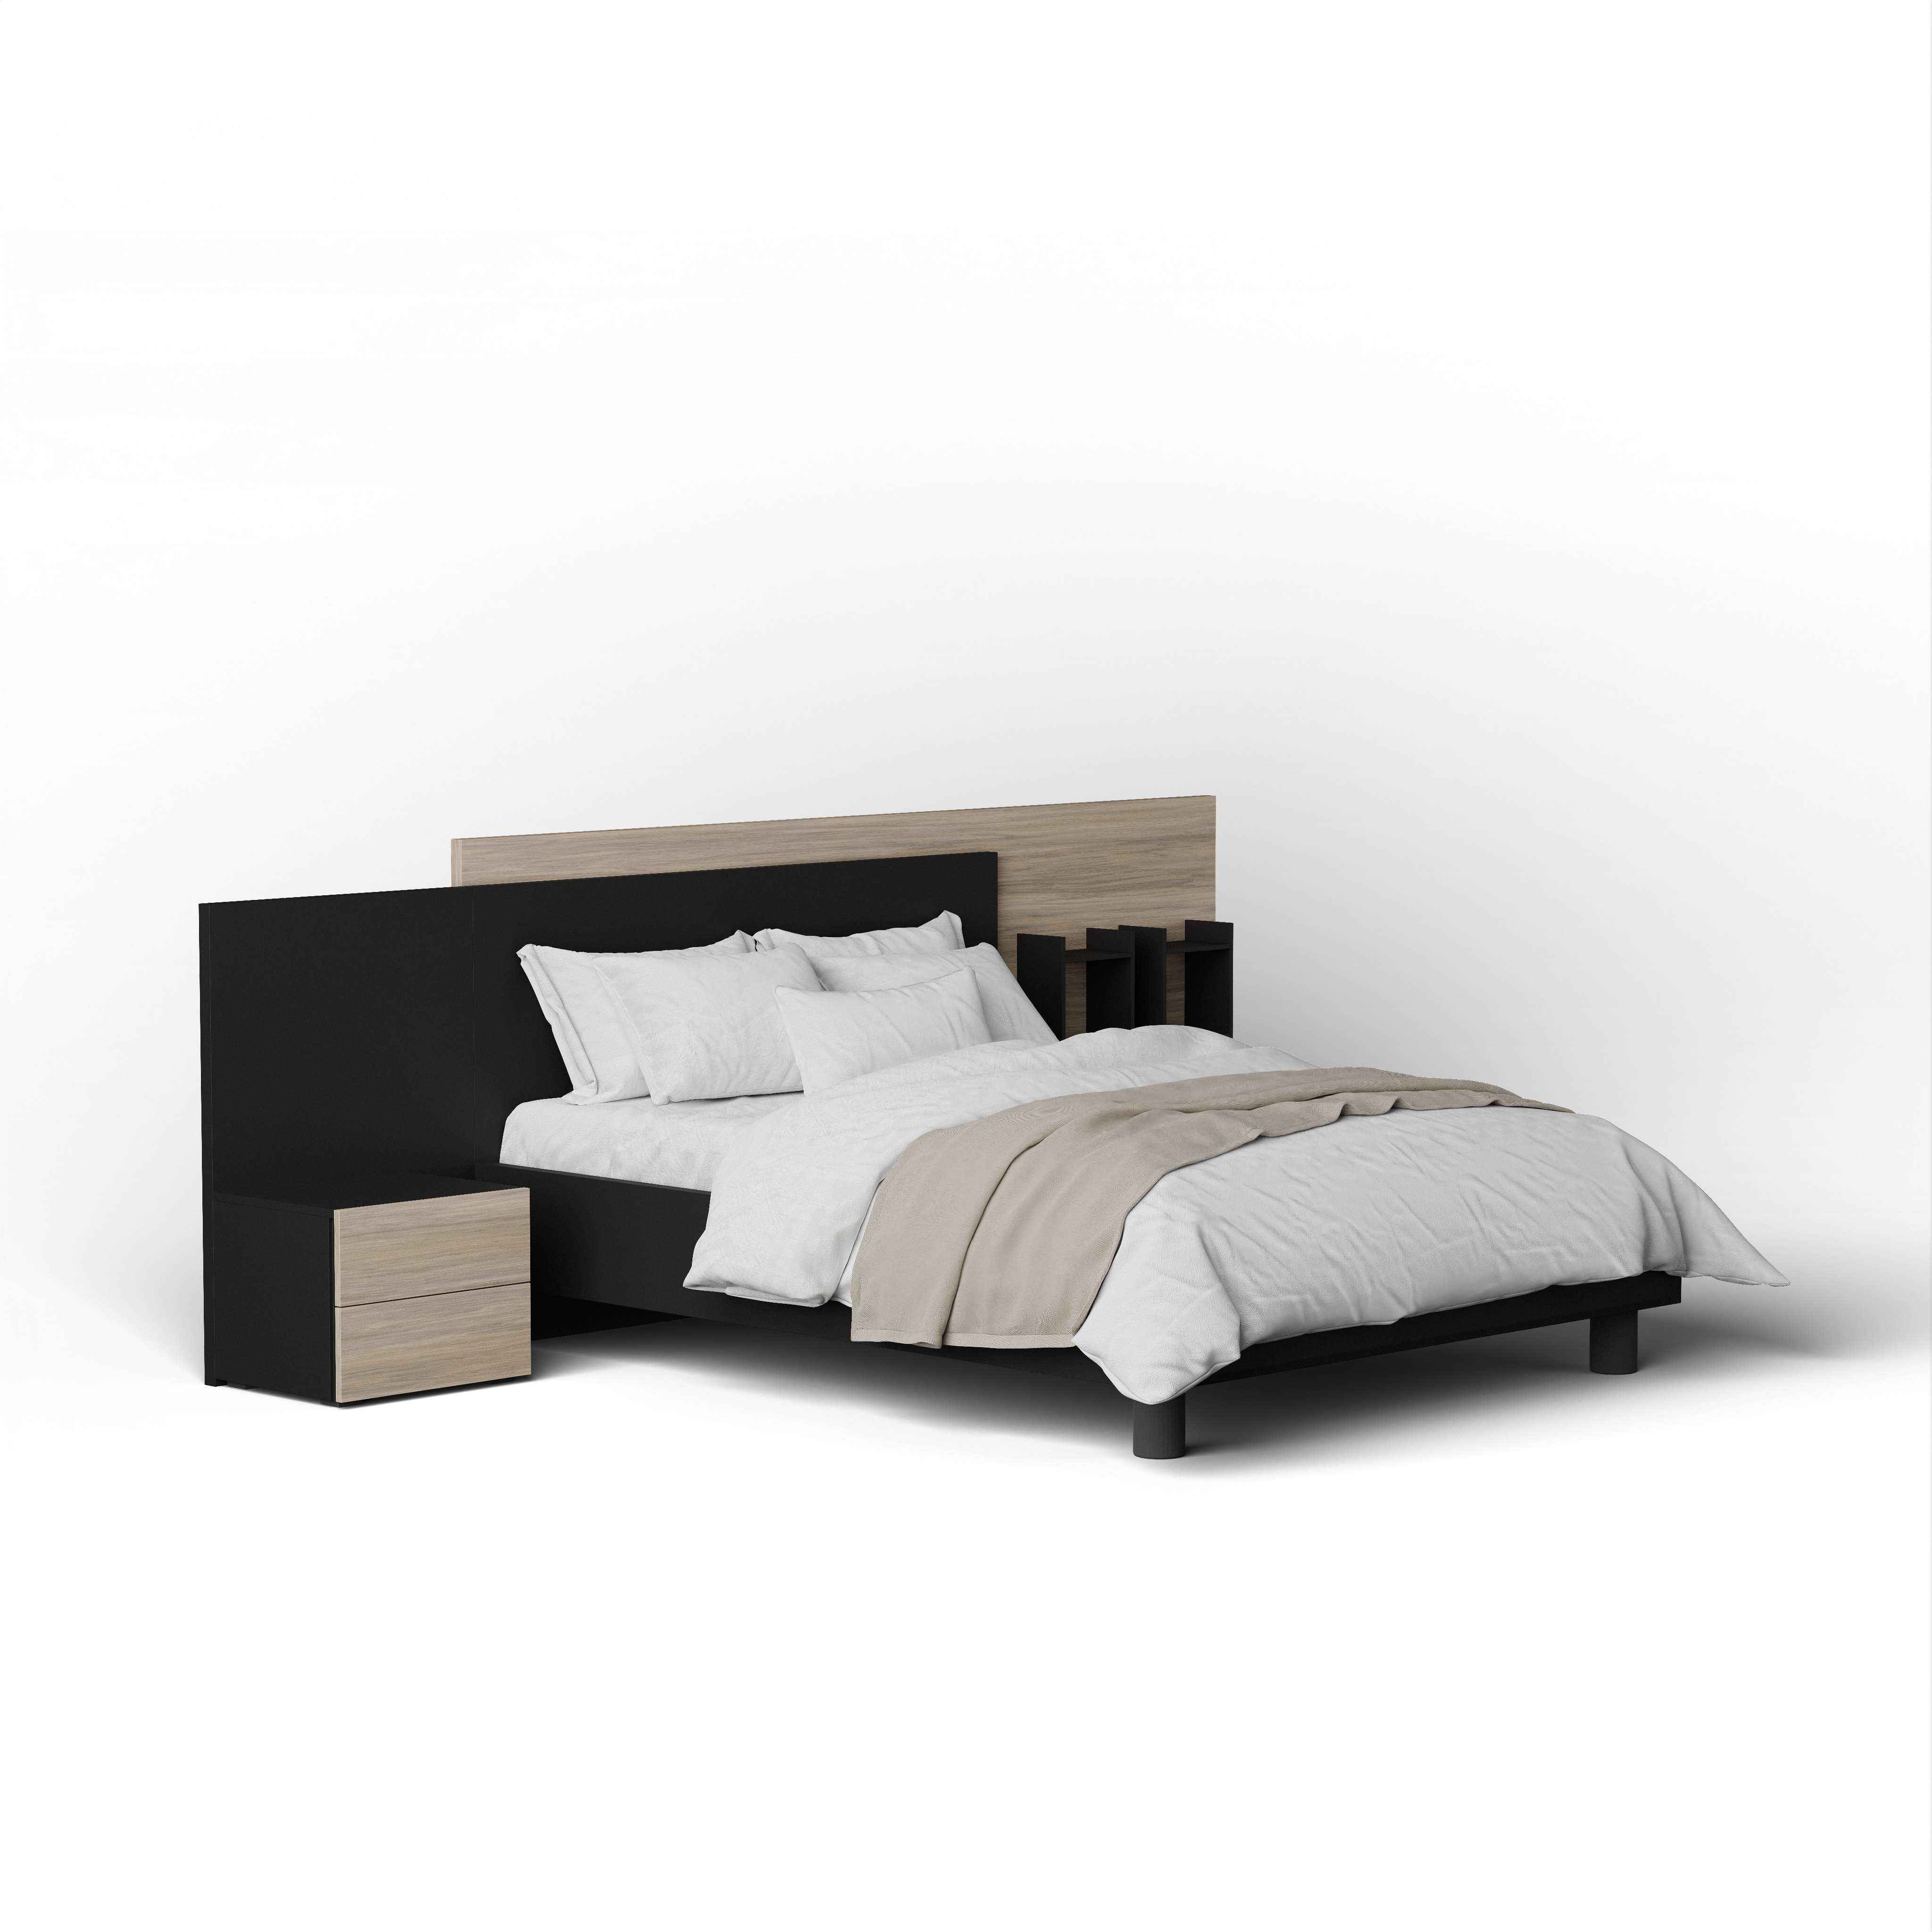 Yumiko Nicole Queen Size Bed